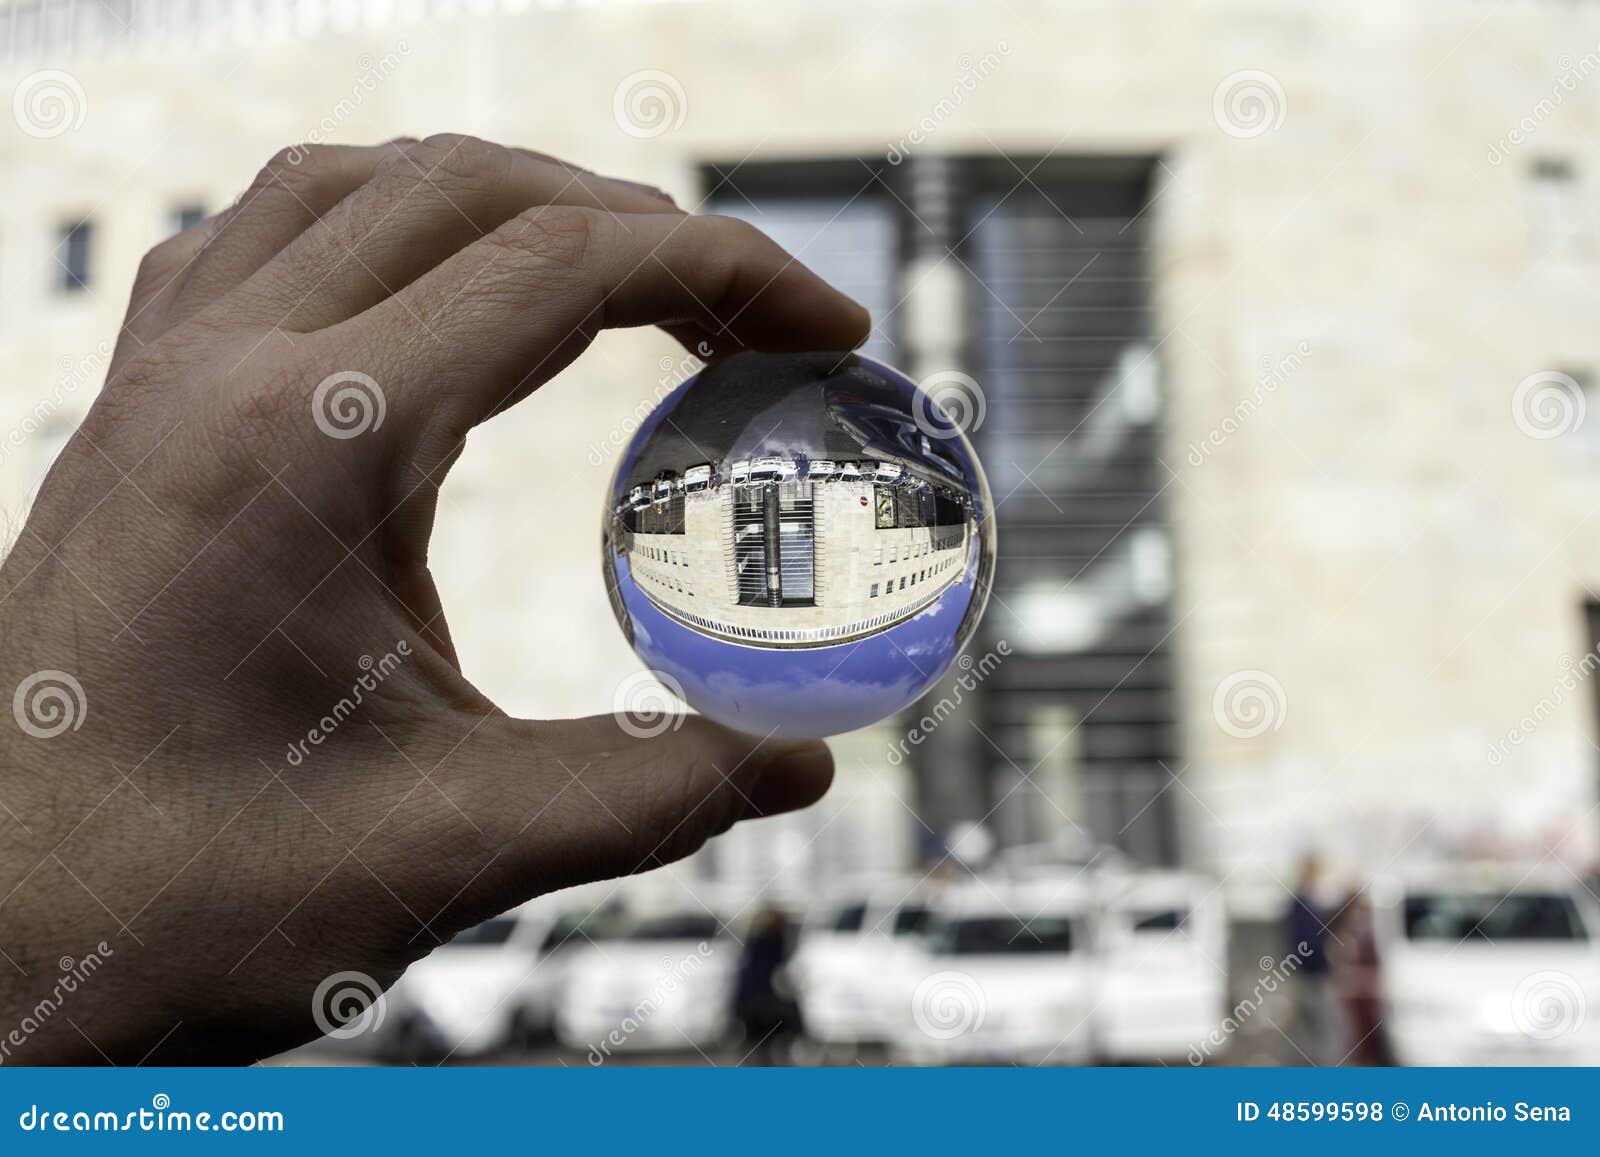 Central Postal Office Naples View Glass Ball 48599598 